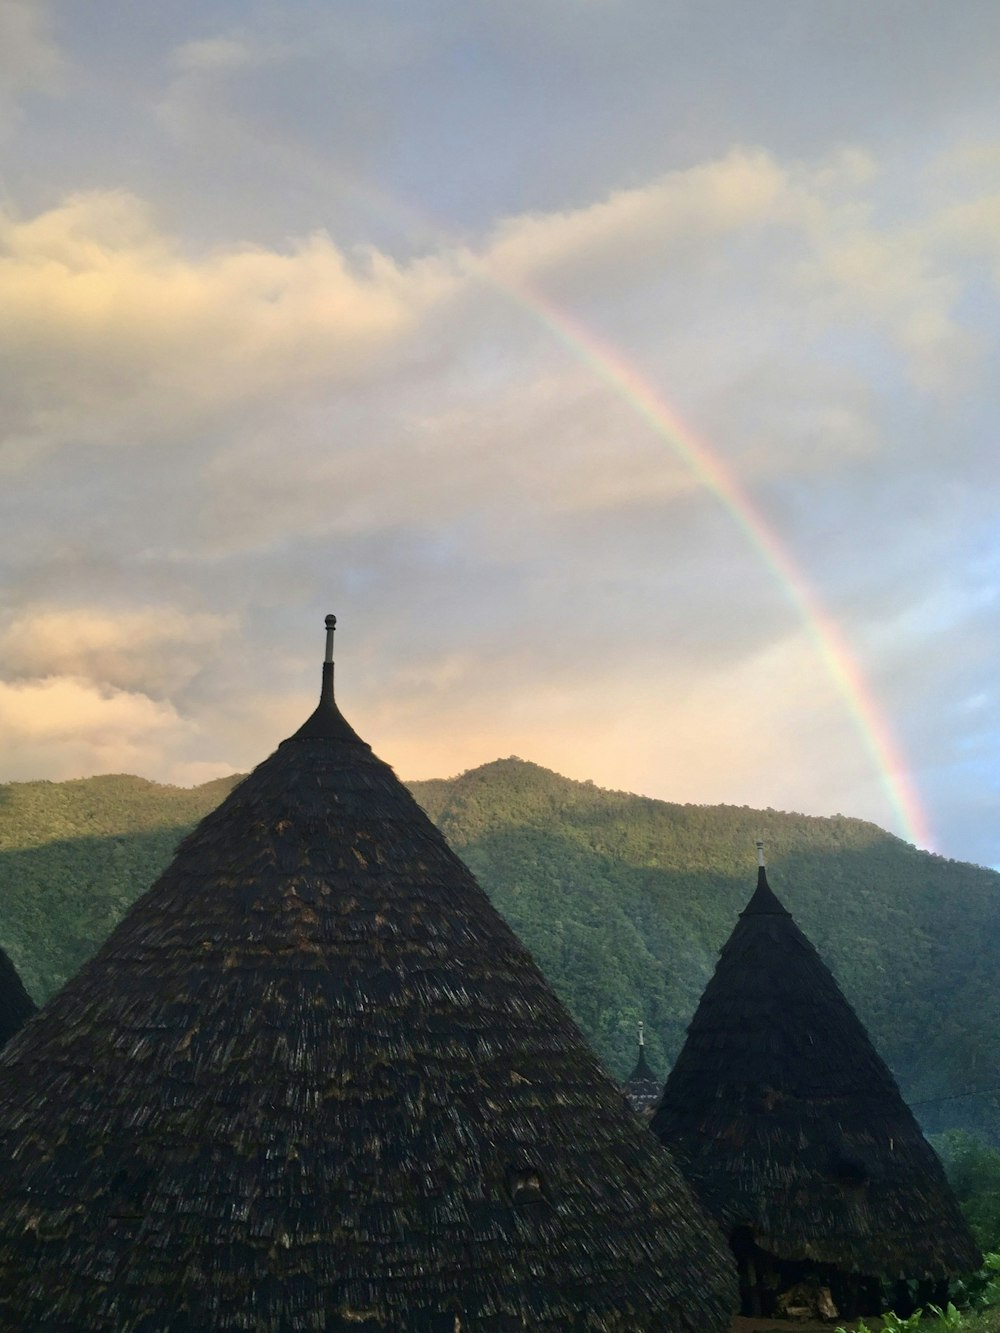 a rainbow in the sky over some huts